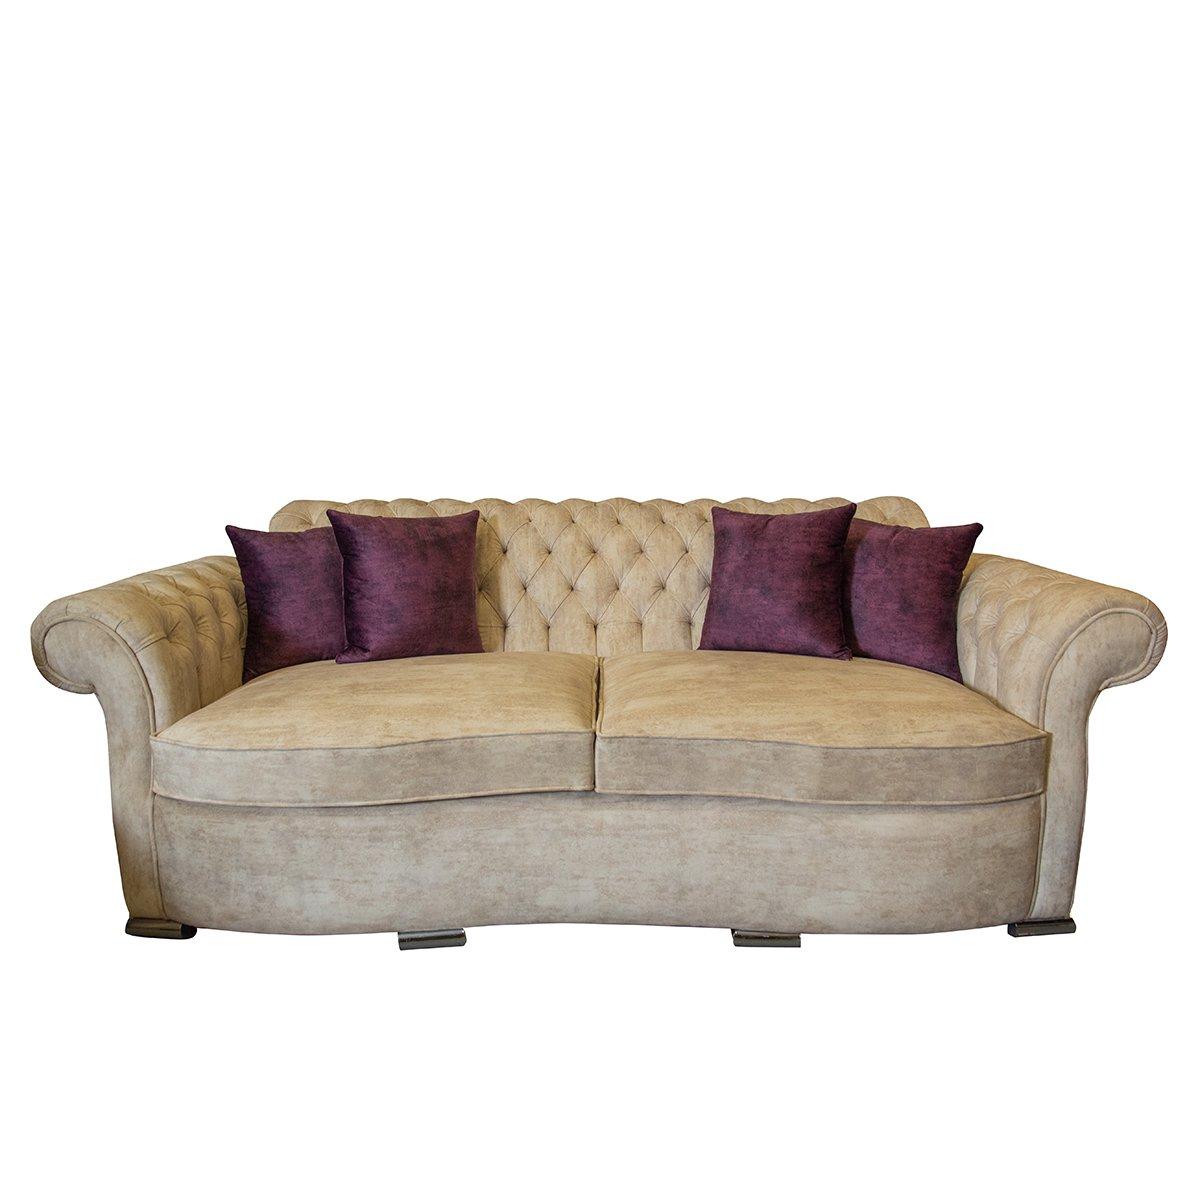 Wood Chester Purple/Beige Living Room '4 Pieces', 20th Century For Sale